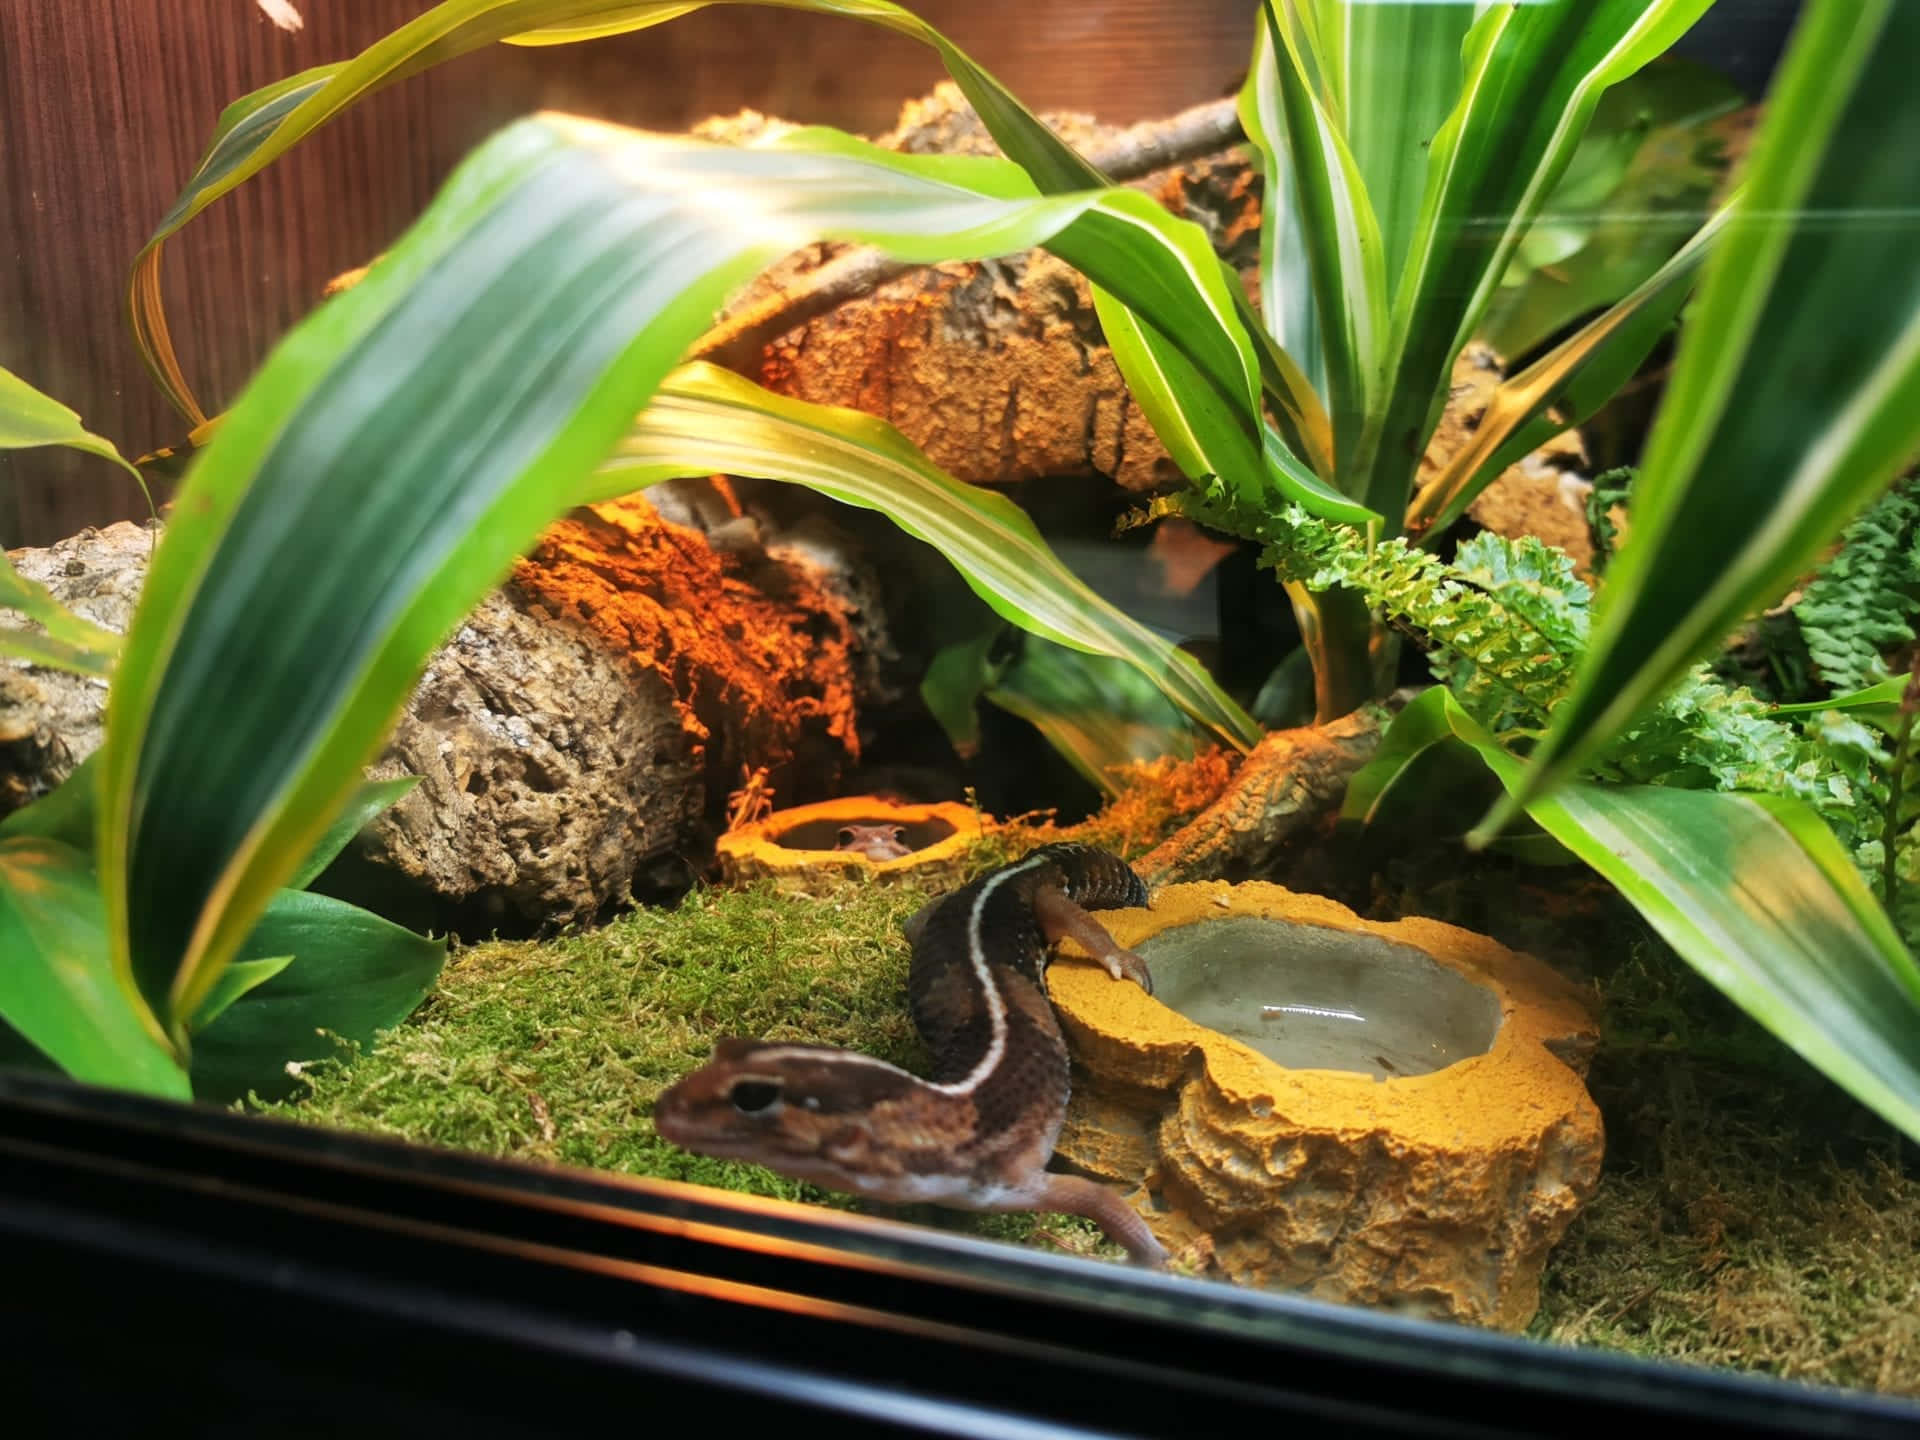 A Lizard In A Glass Enclosure With Plants